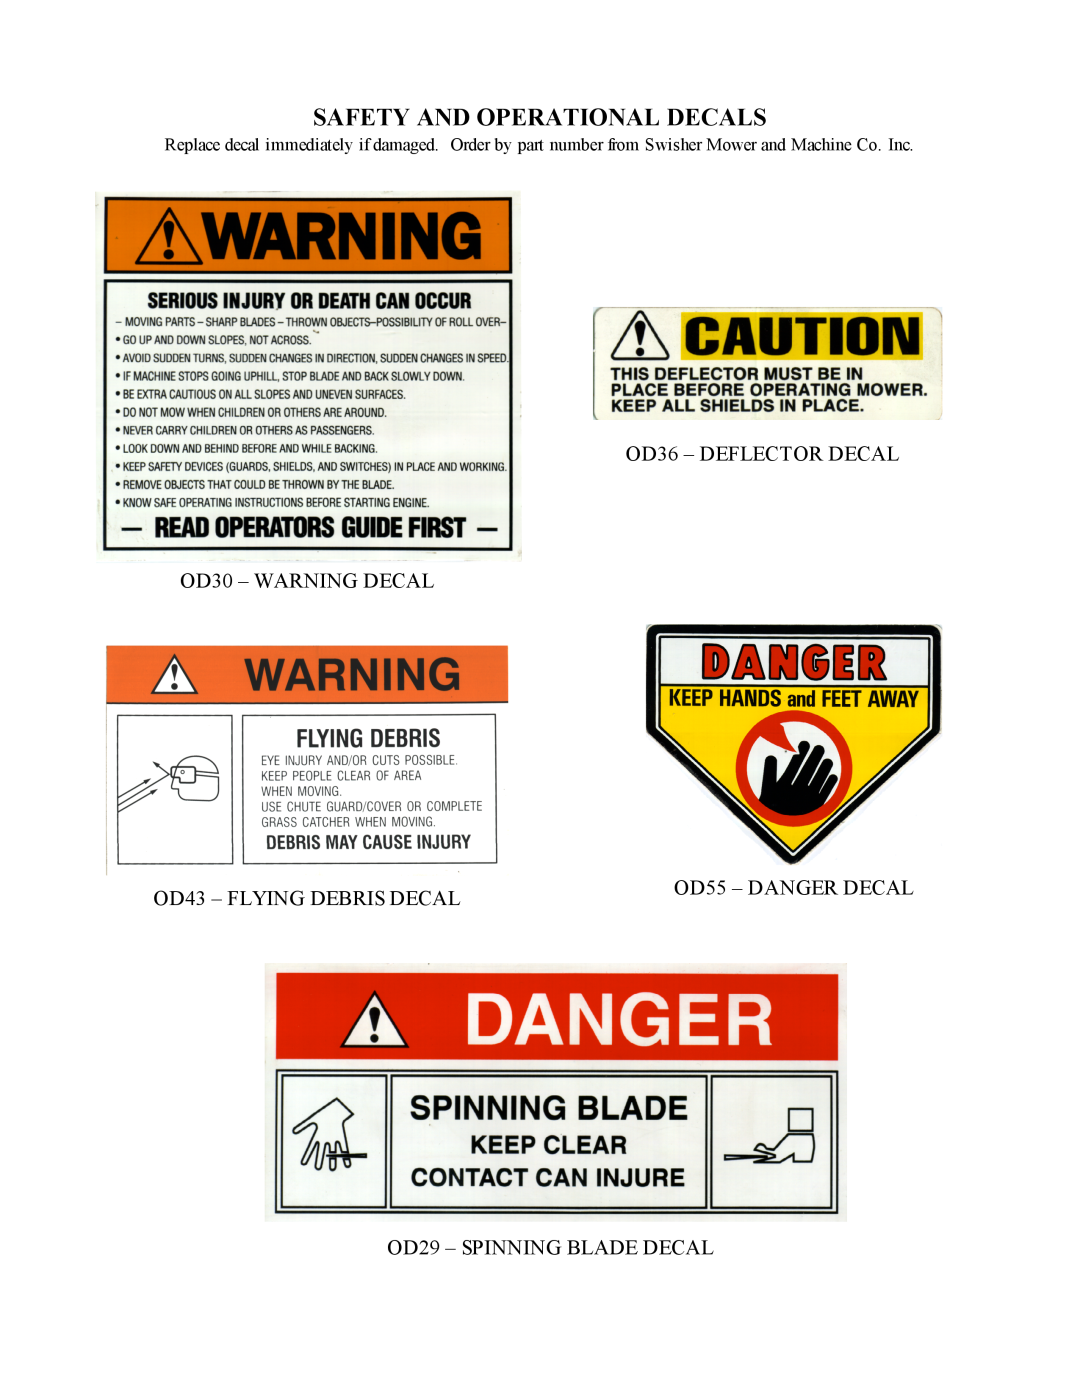 Swisher WB942 Safety And Operational Decals, OD36 - DEFLECTOR DECAL OD30 - WARNING DECAL, OD43 - FLYING DEBRIS DECAL 